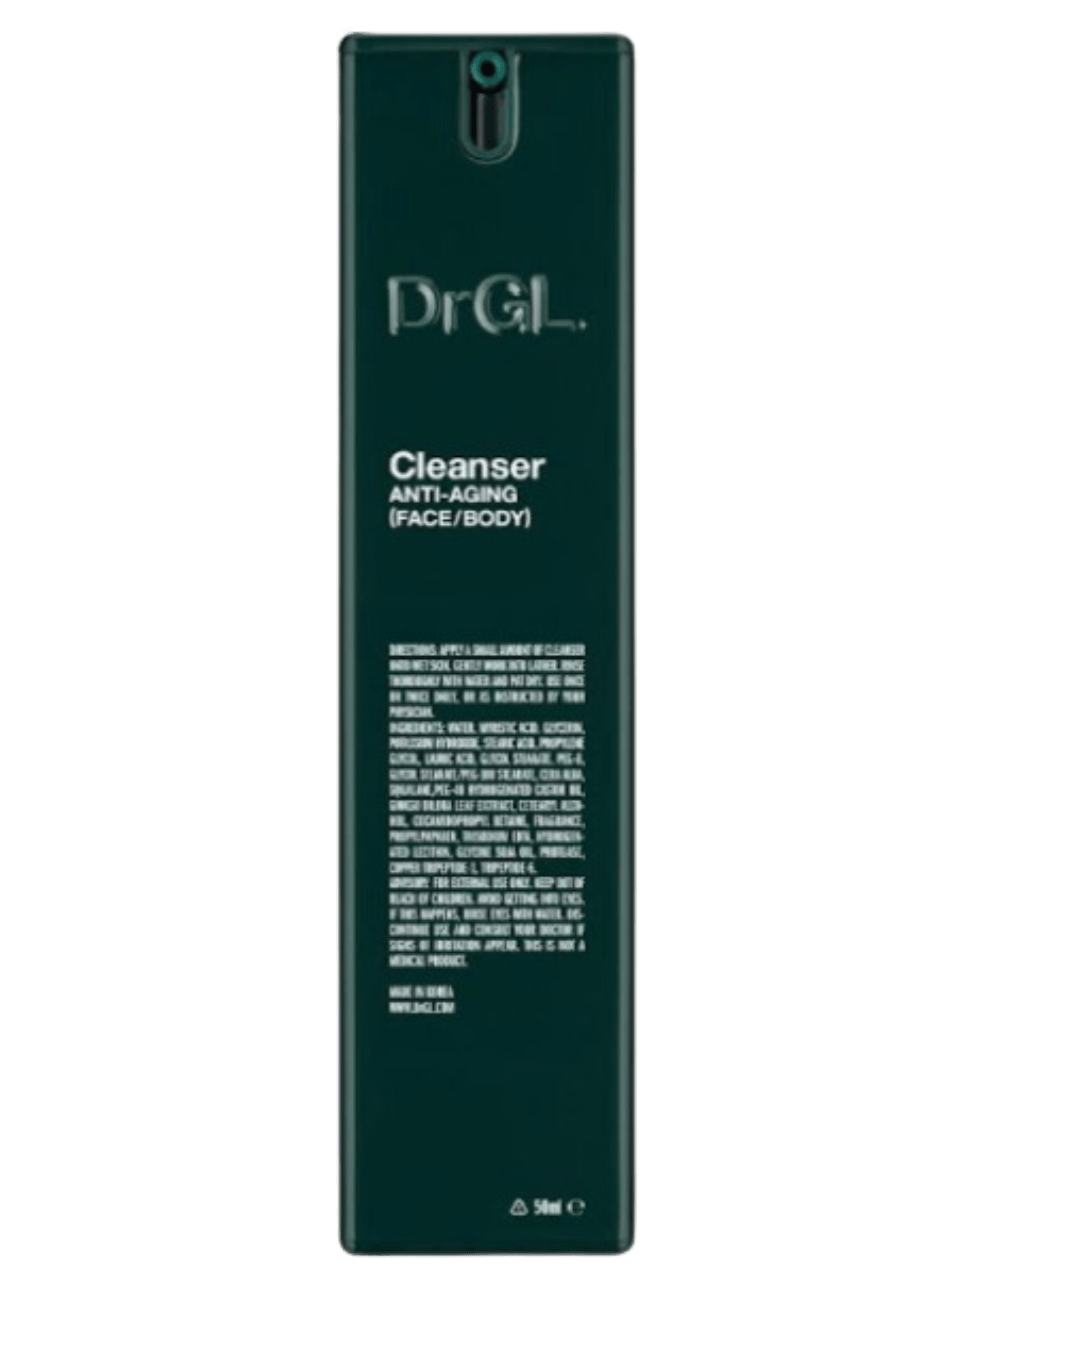 Daily Vanity Beauty Awards 2024 Best Skincare DrGL Cleanser Anti-Aging Voted By Beauty Experts